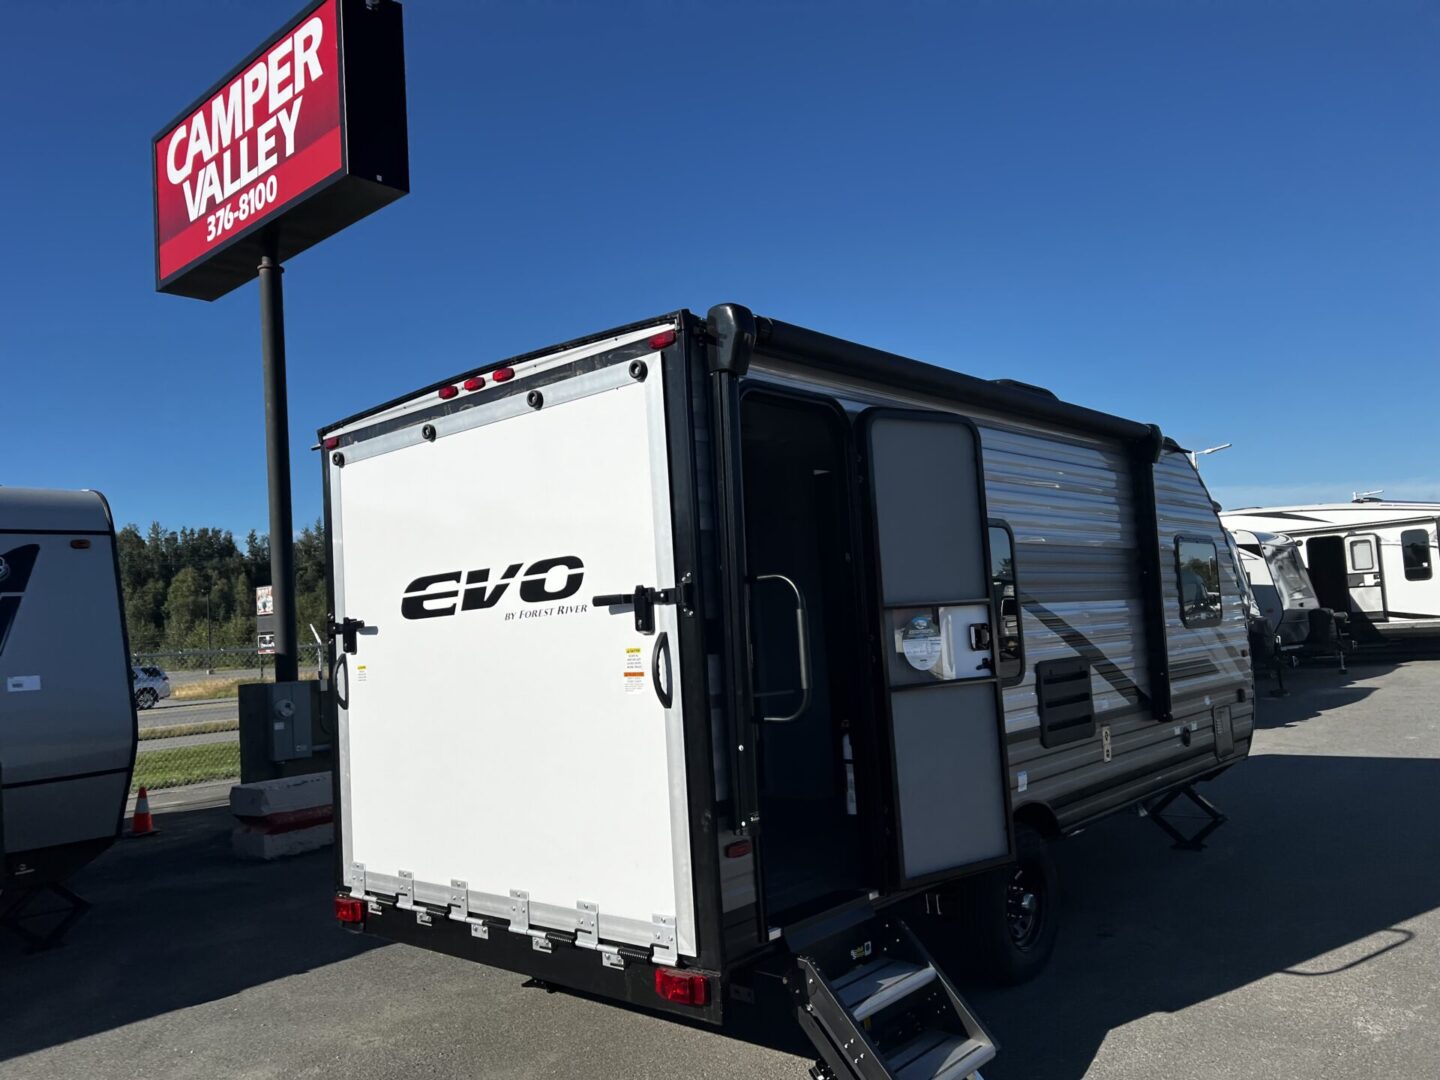 EVO 178 RT TOY HAULER is available for sale at Camper Valley